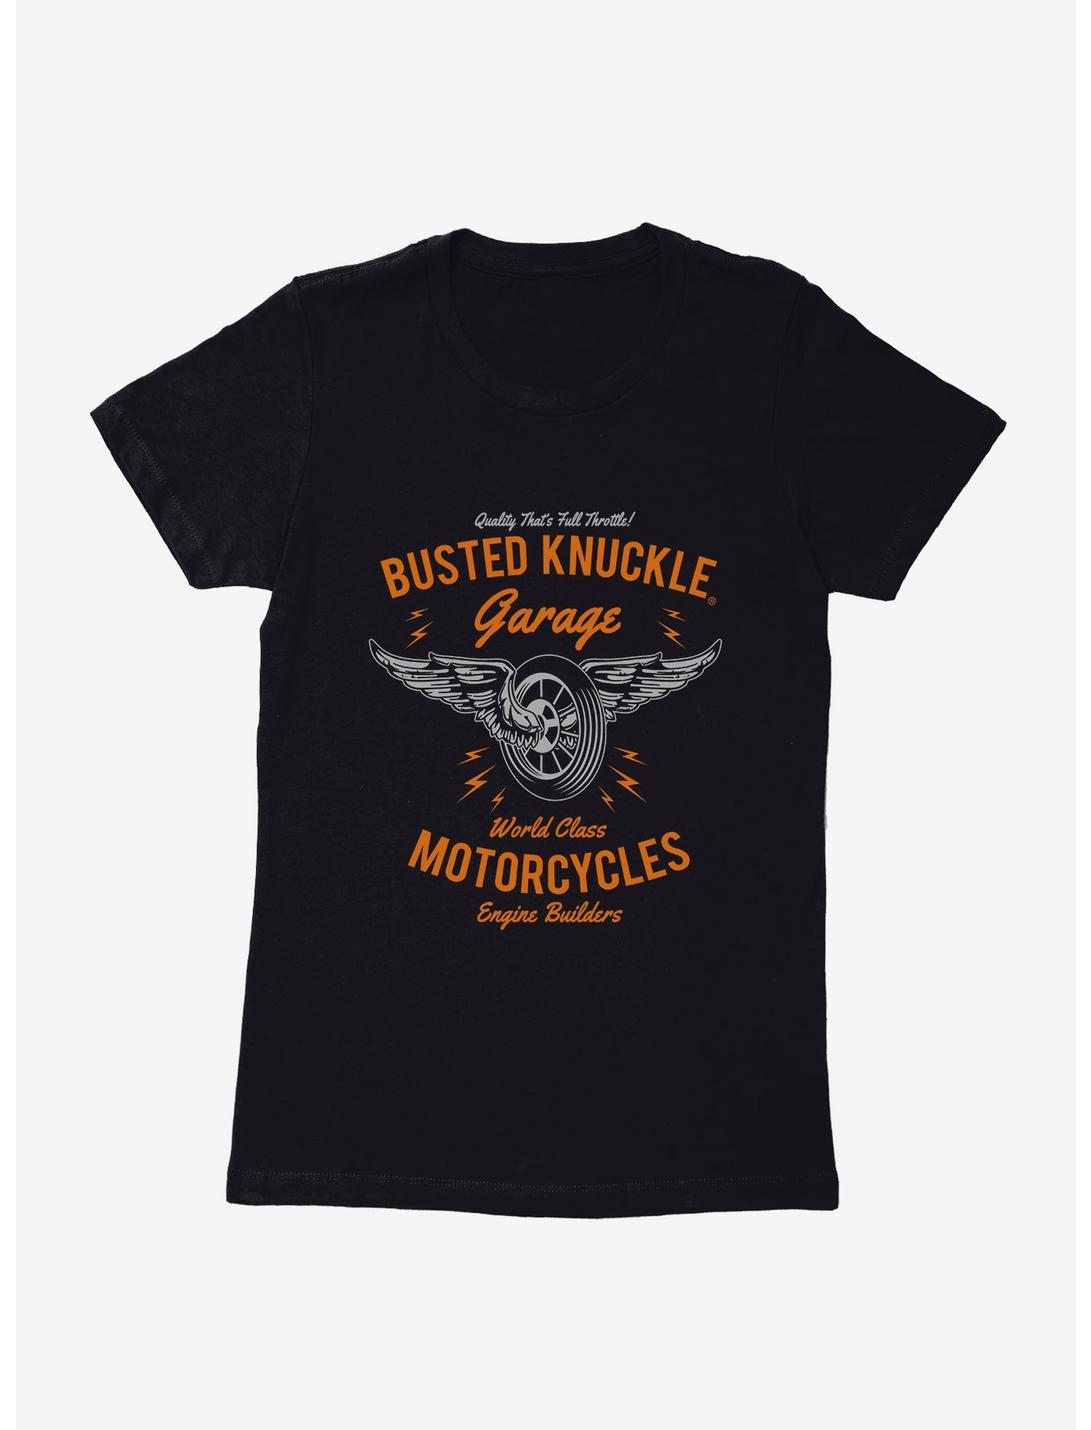 Busted Knuckle Garage World Class Motorcycles Womens T-Shirt, , hi-res